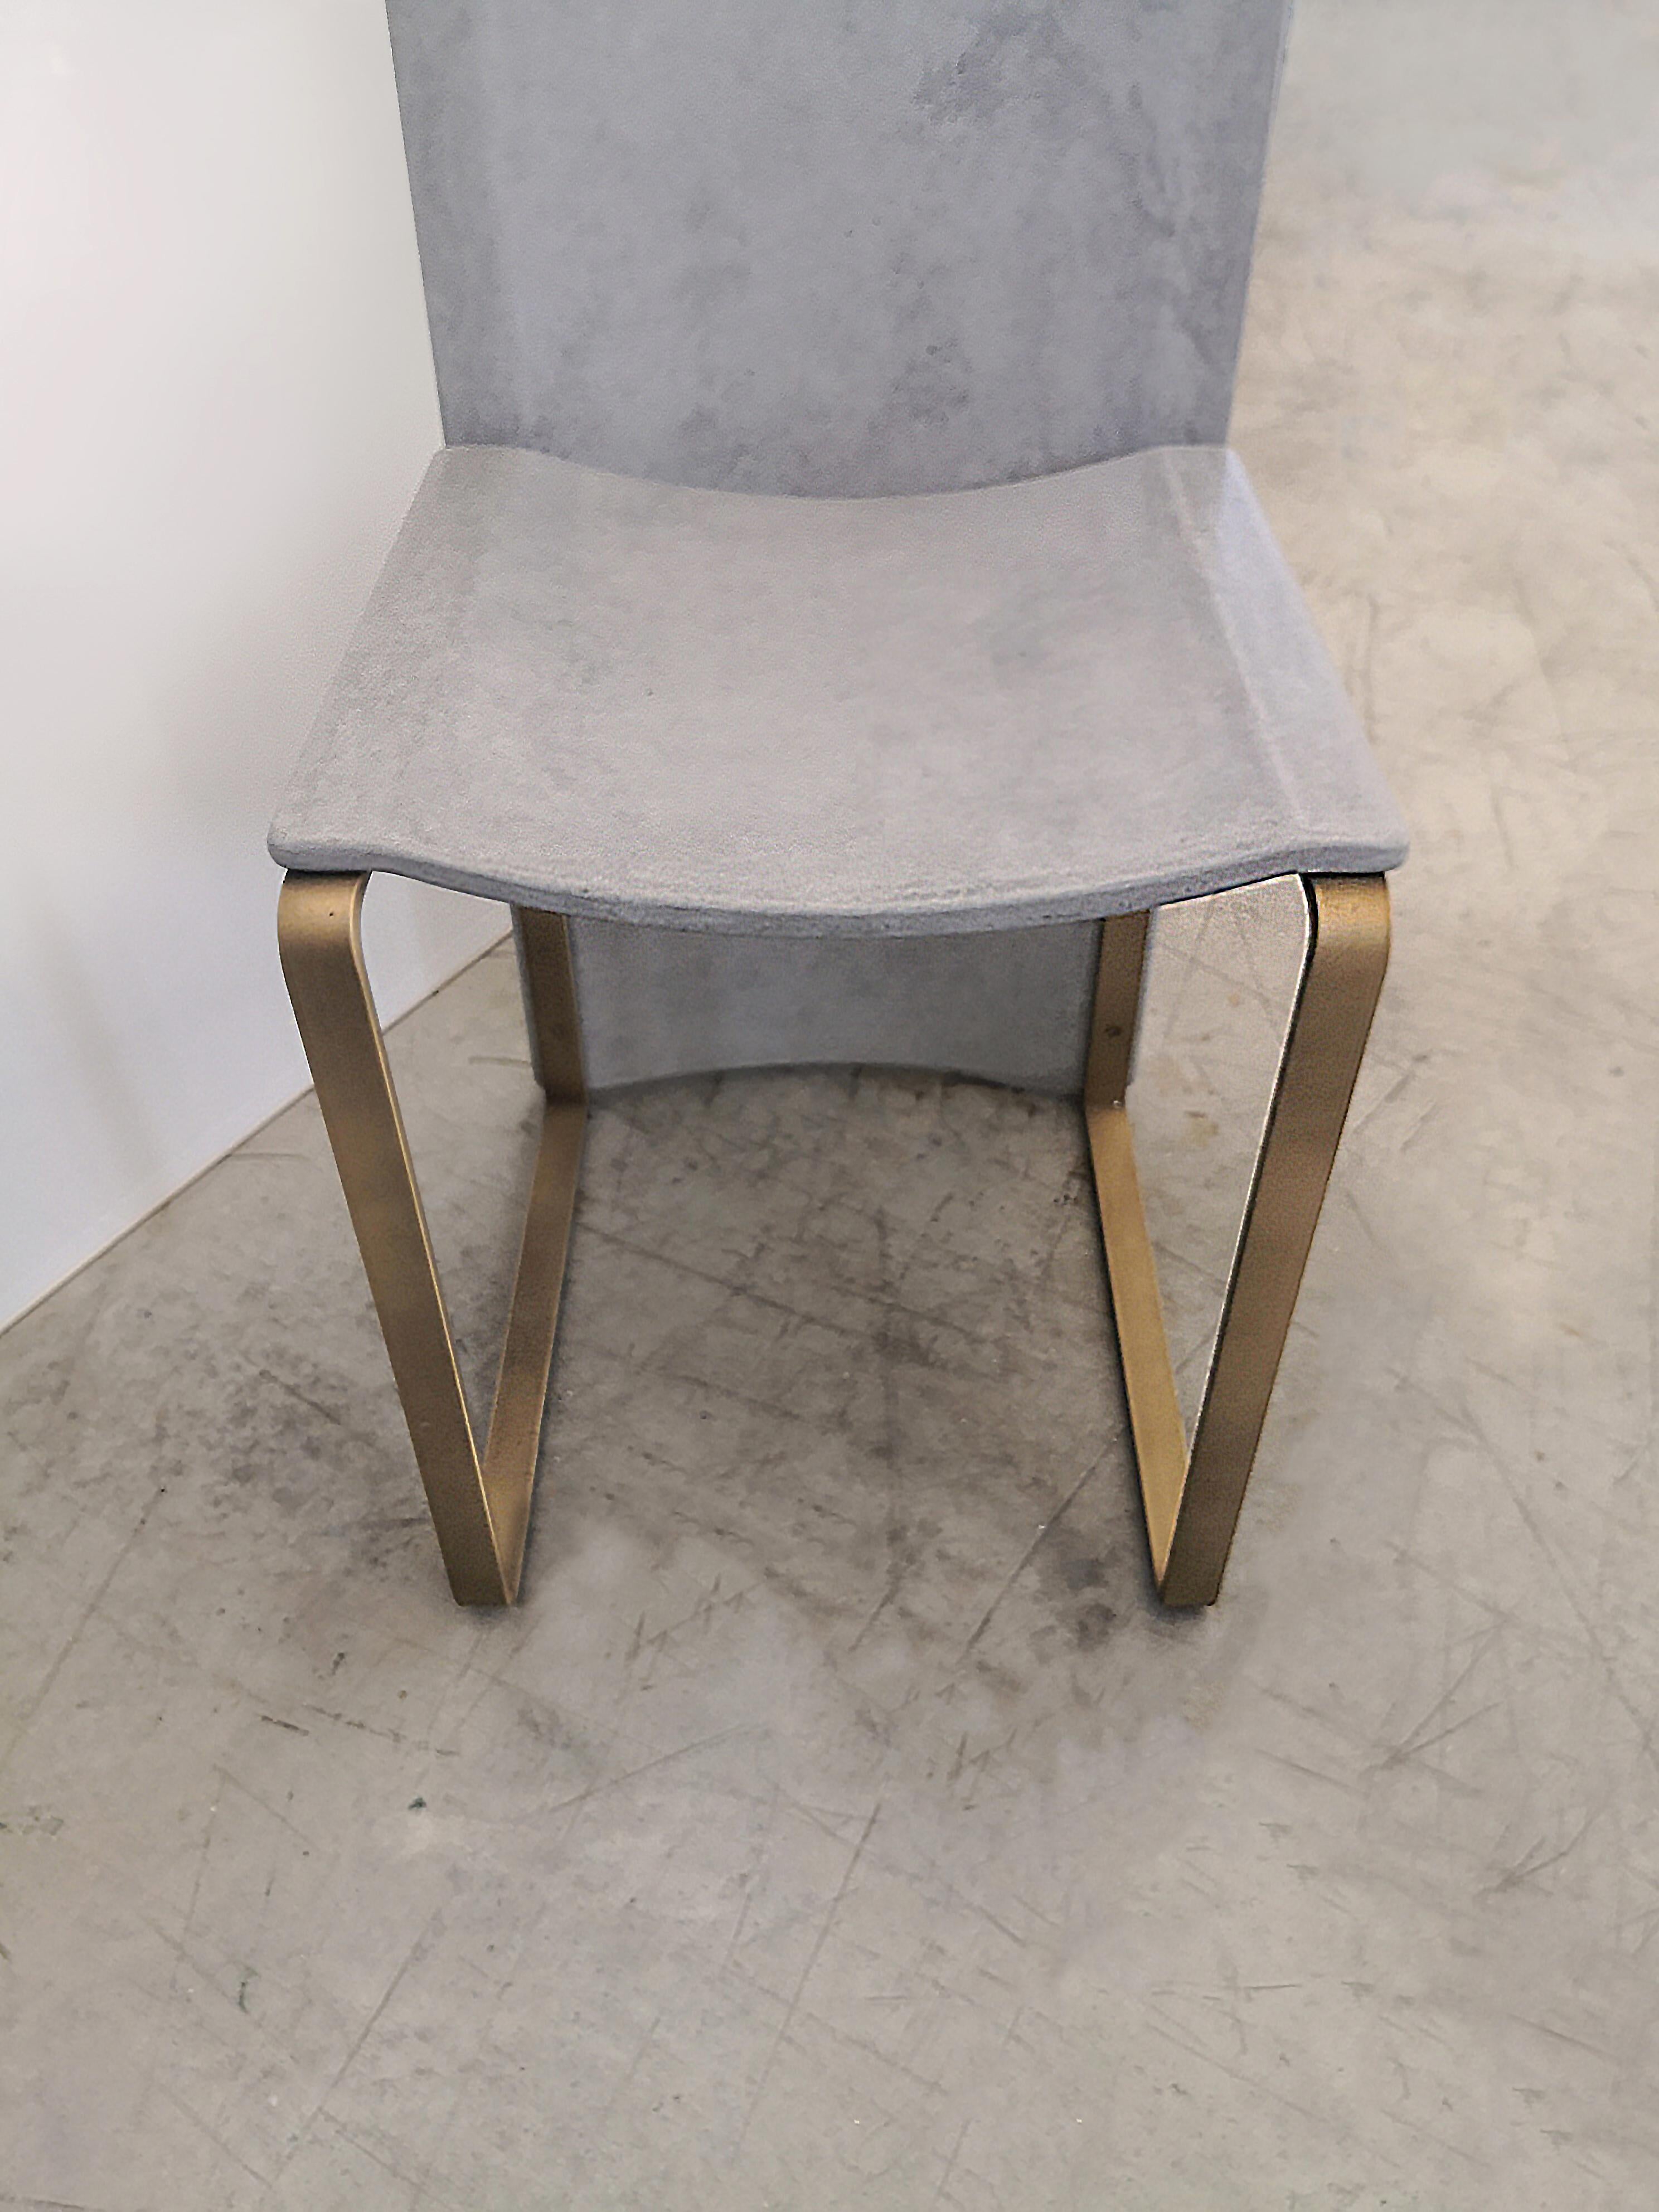 Hand-Crafted Rubeda concrete chair design Roberto Giacomucci 2018 For Sale